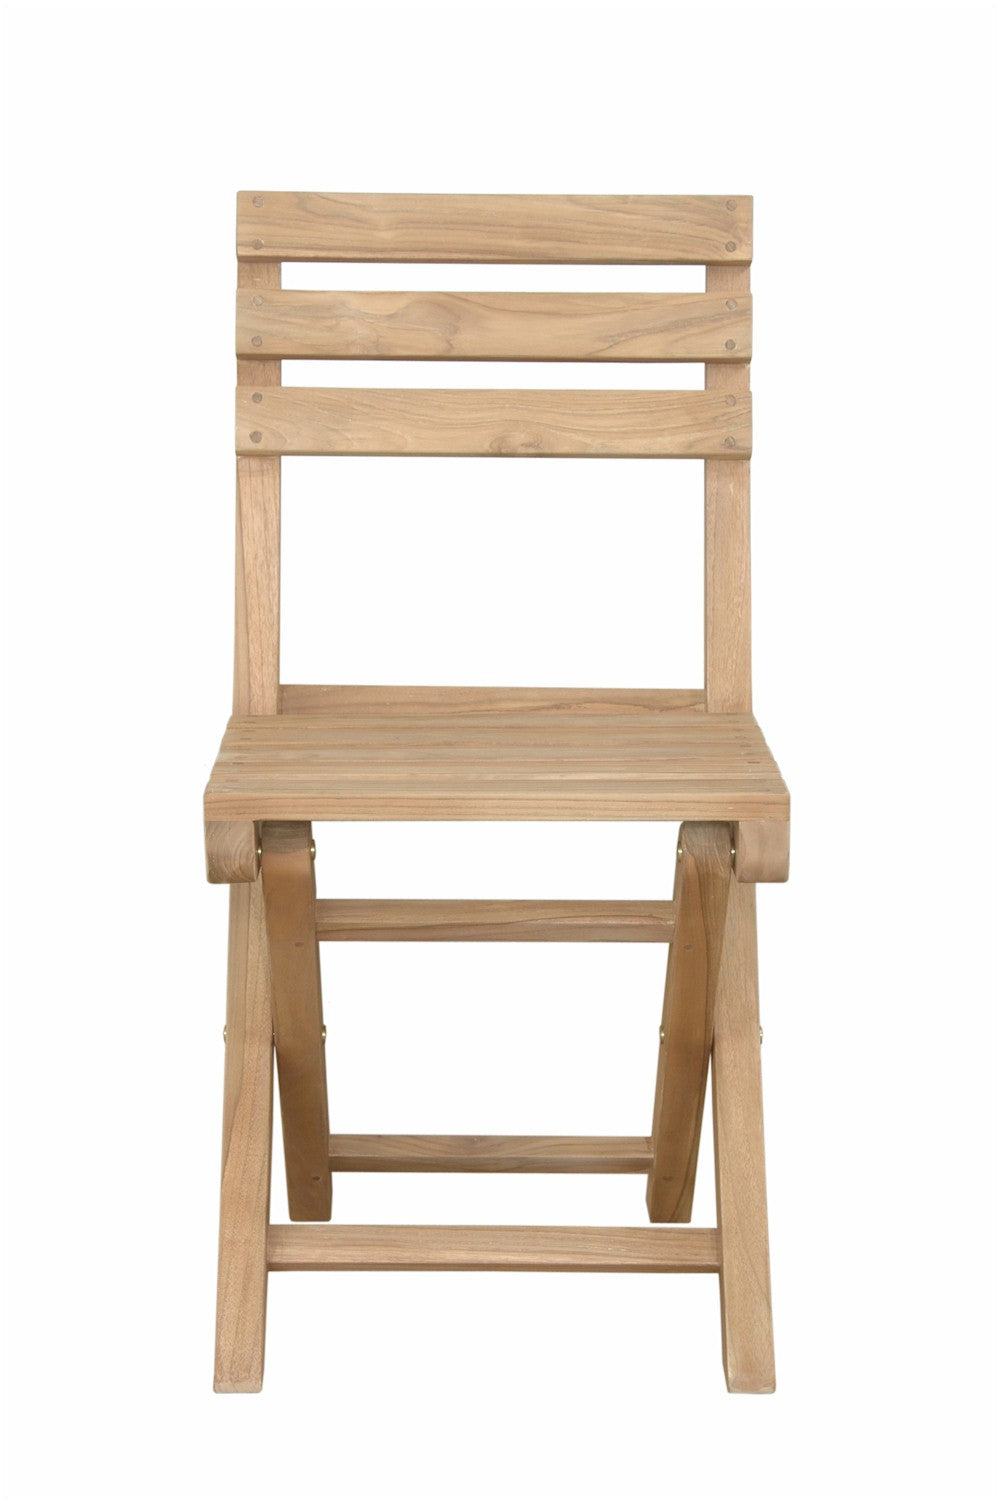 Anderson Teak Alabama Folding Chair (Sold as a pair) CHF-2014